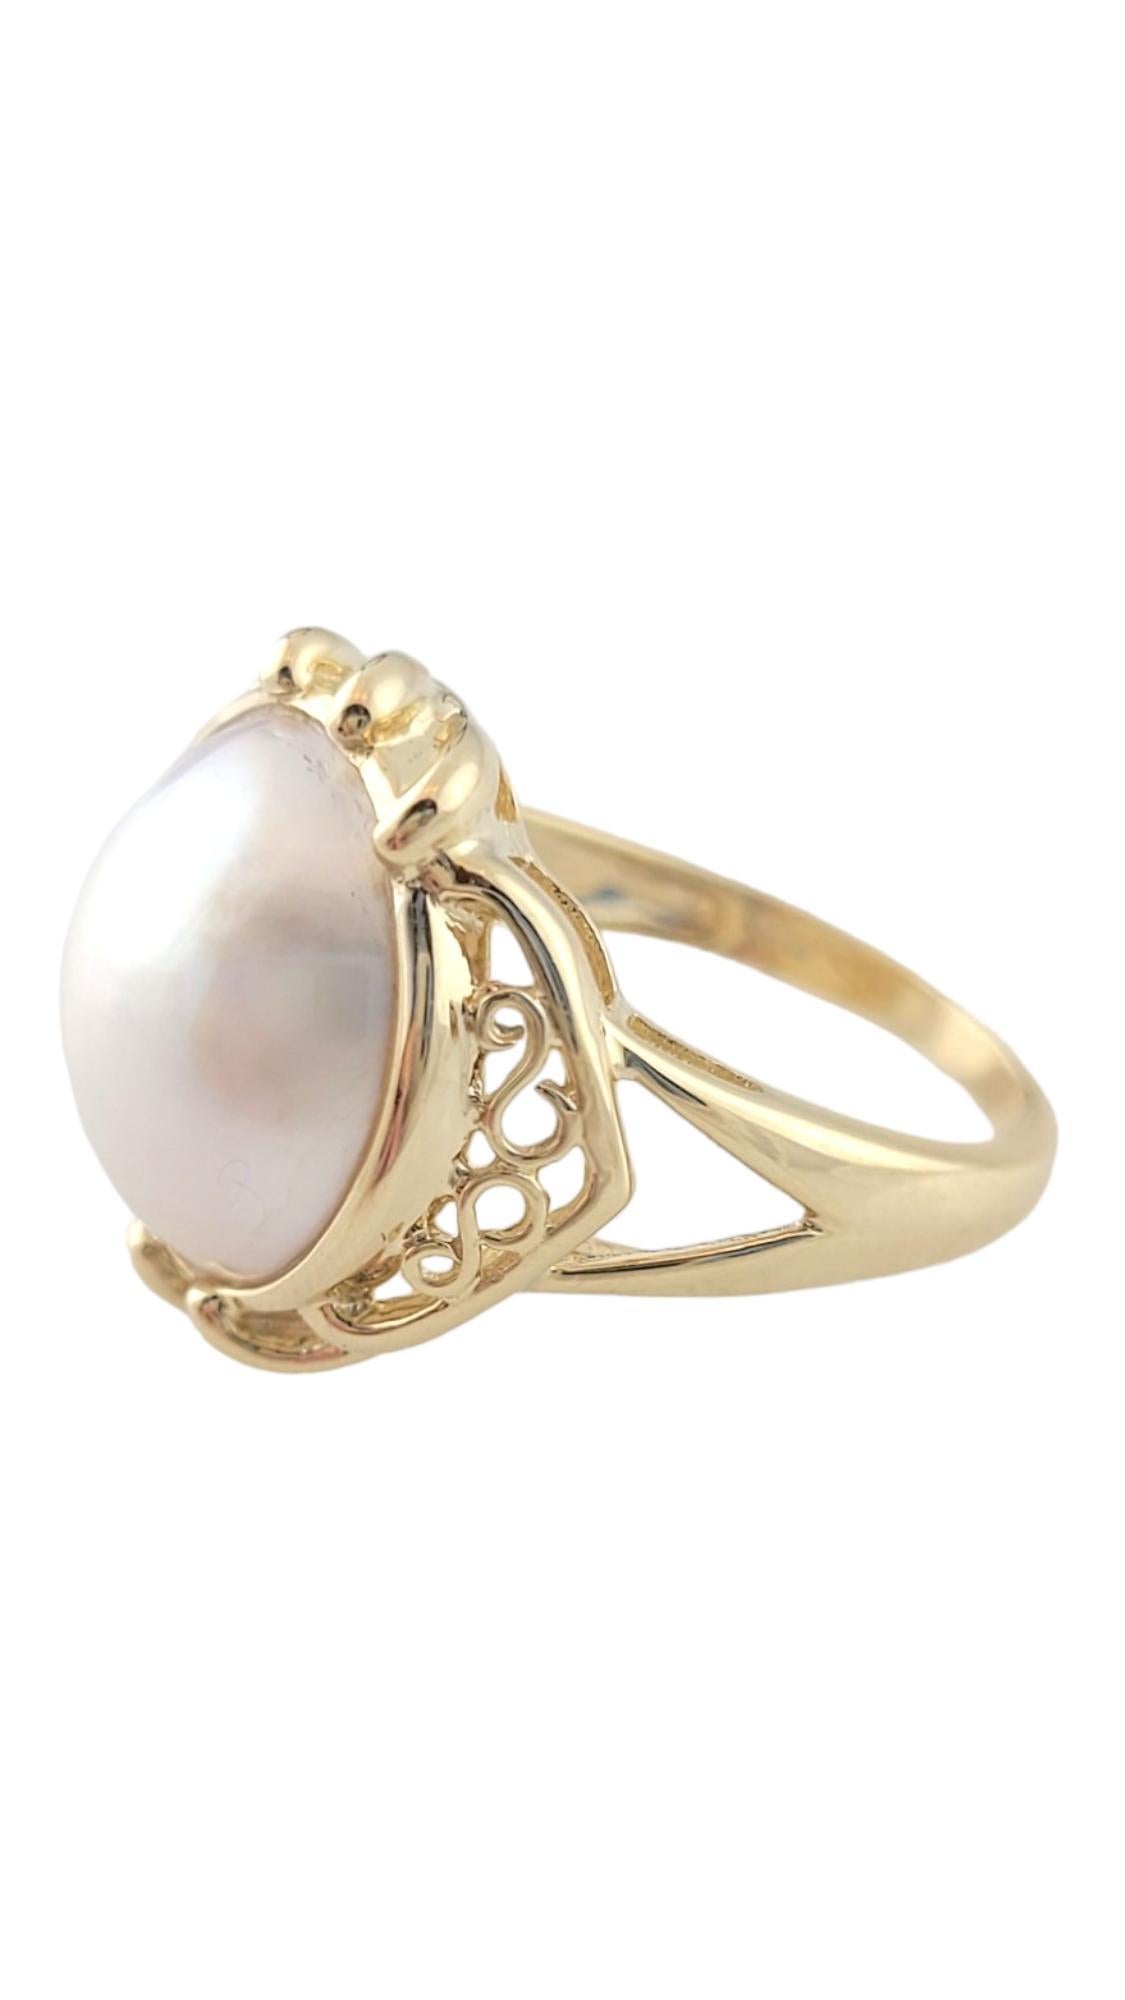 Vintage 14K Yellow Gold Mabe Pearl Ring size 6.25

This ring features a gorgeous Mabe pearl set in a 14K yellow gold ring with beautiful detailing!

Pearl: 12.89mm

Ring size: 6.25
Shank: 1.76mm
Front: 17.03mm

Weight: 2.9 dwt/ 4.5 g

Hallmark: